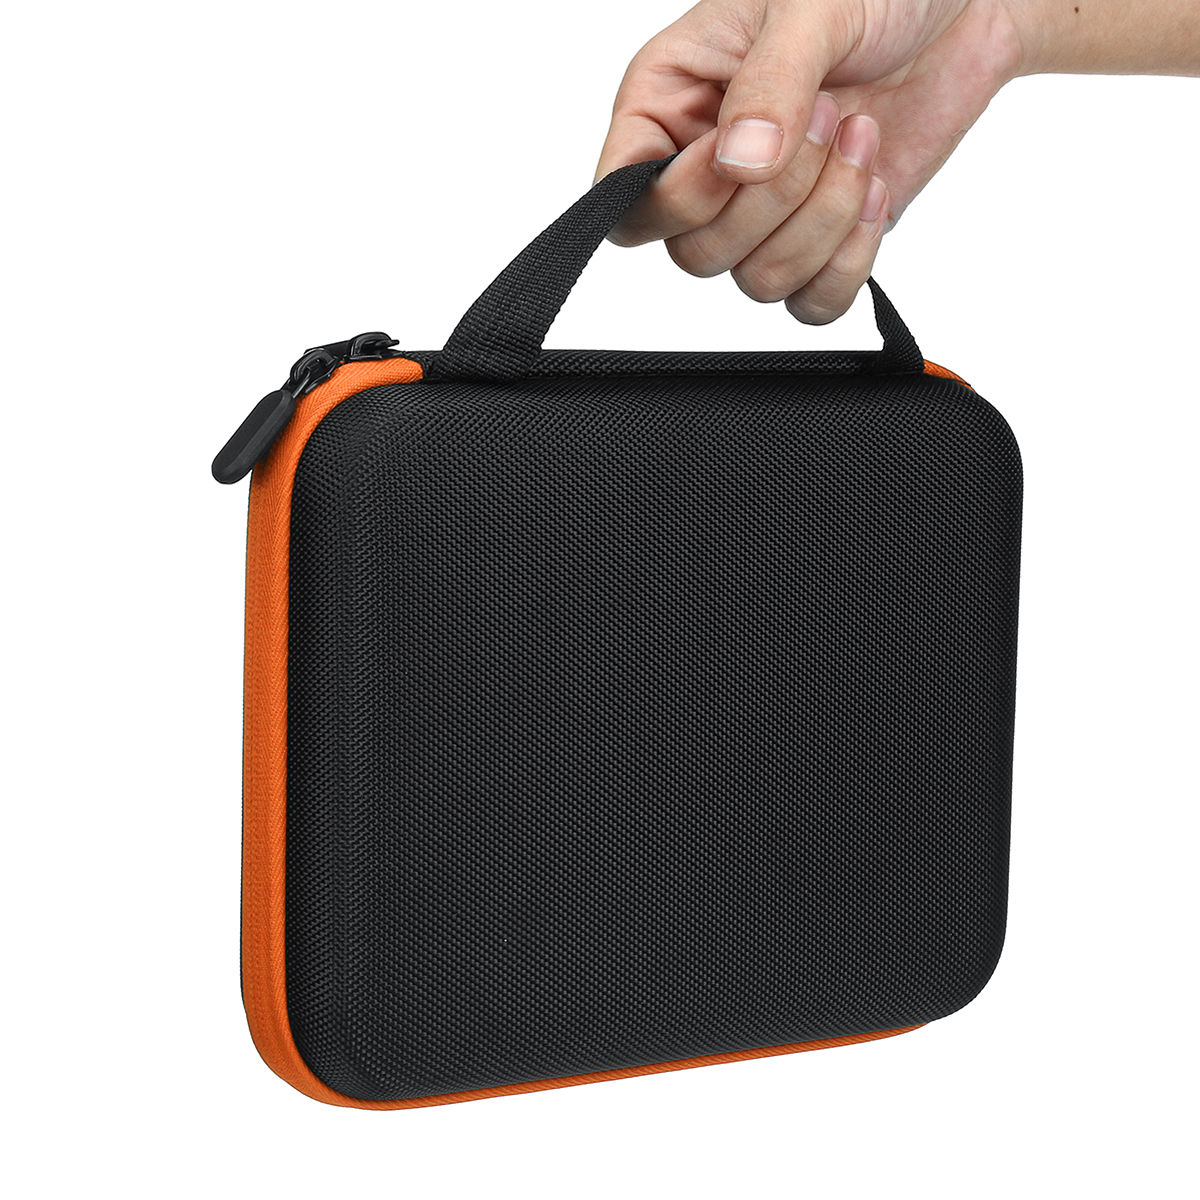 63-Bottles-Essential-Oil-Carrying-Storage-Case-Travel-Portable-Bag-Box-1605407-8